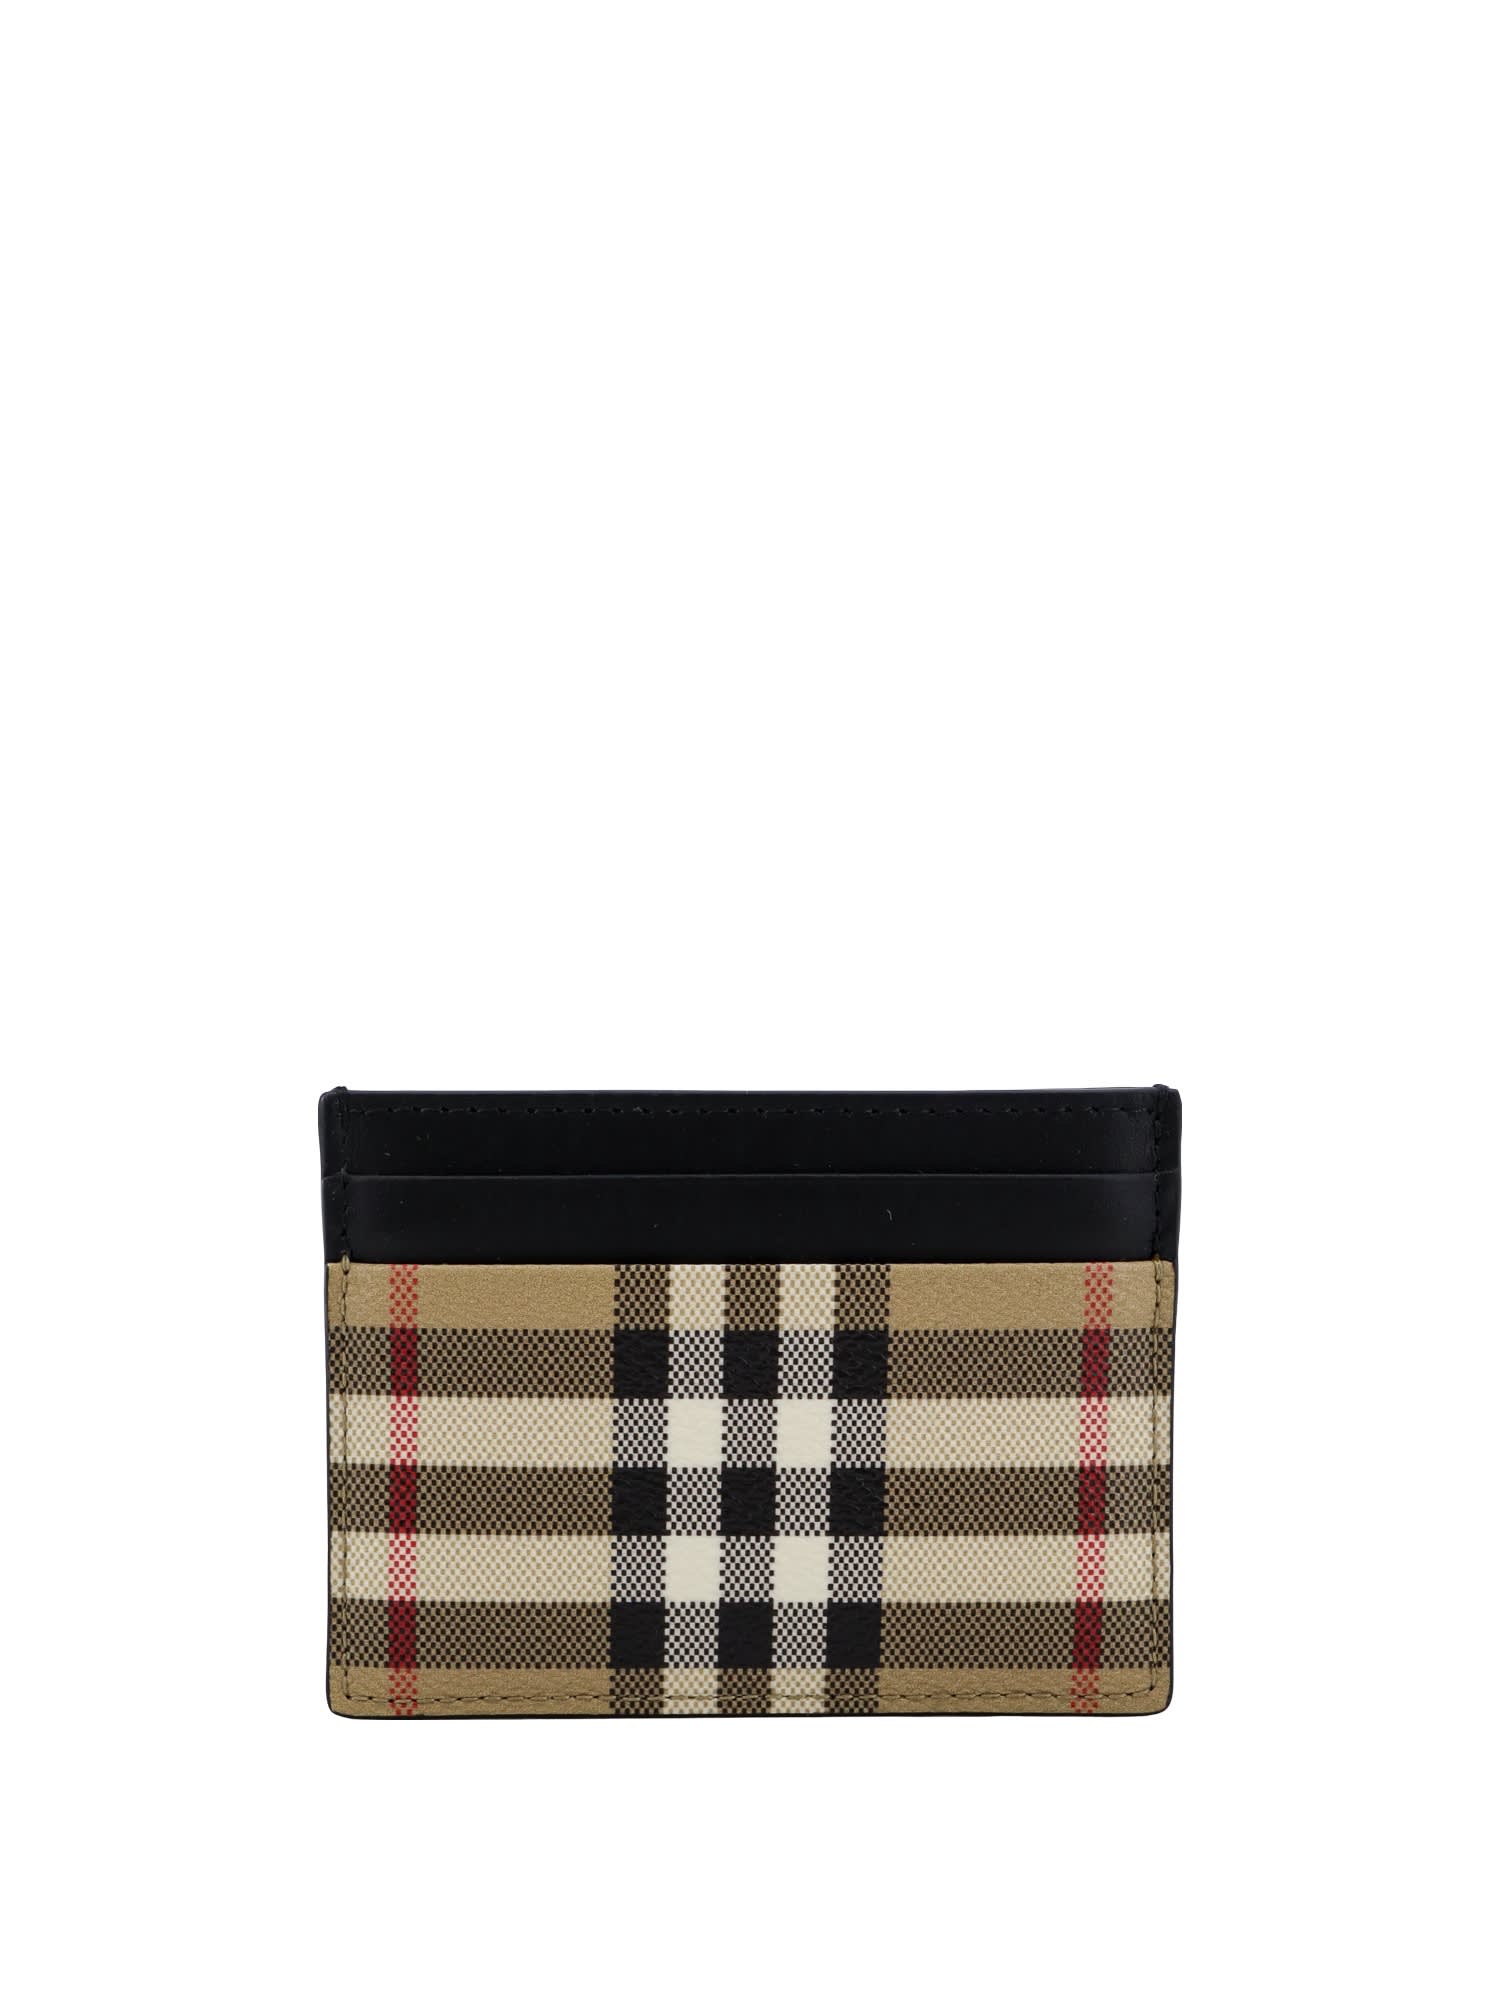 Burberry Card Holder In Brown/black